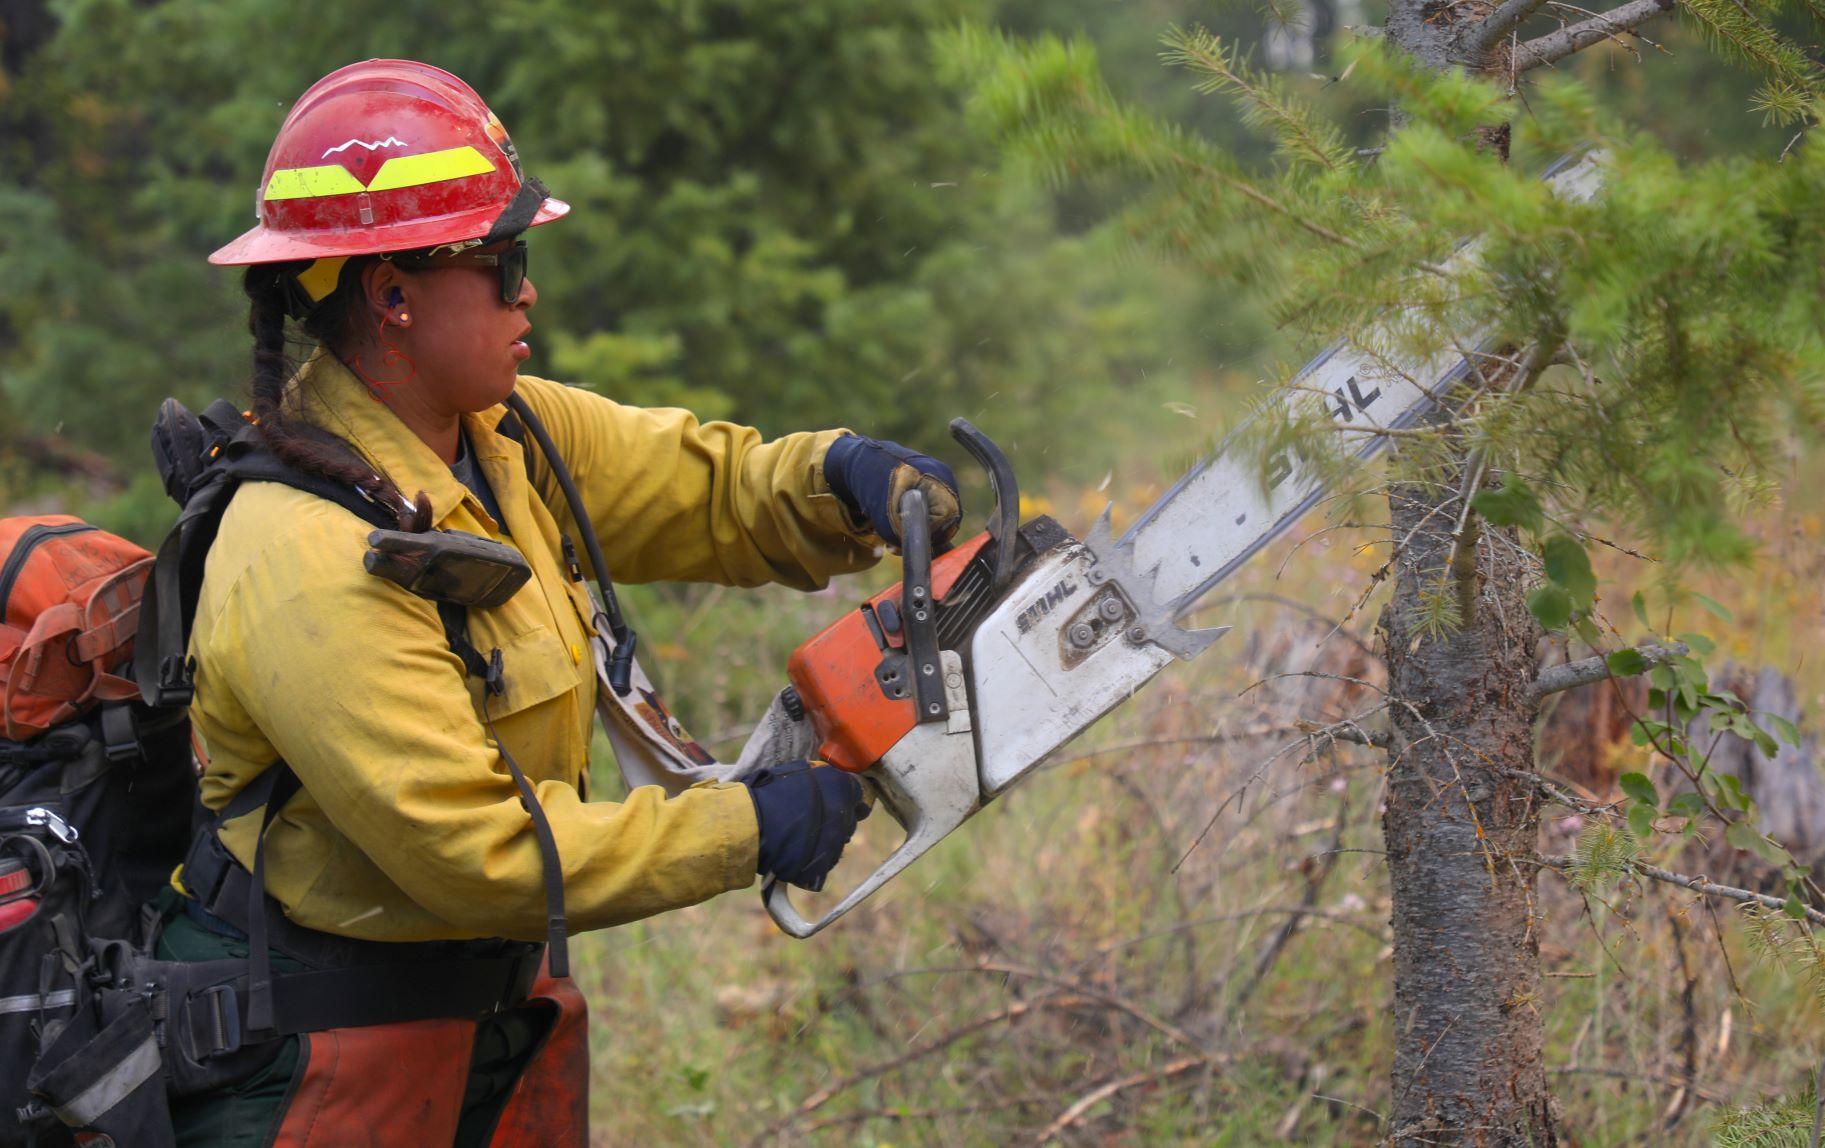 Firefighter conducting saw work.